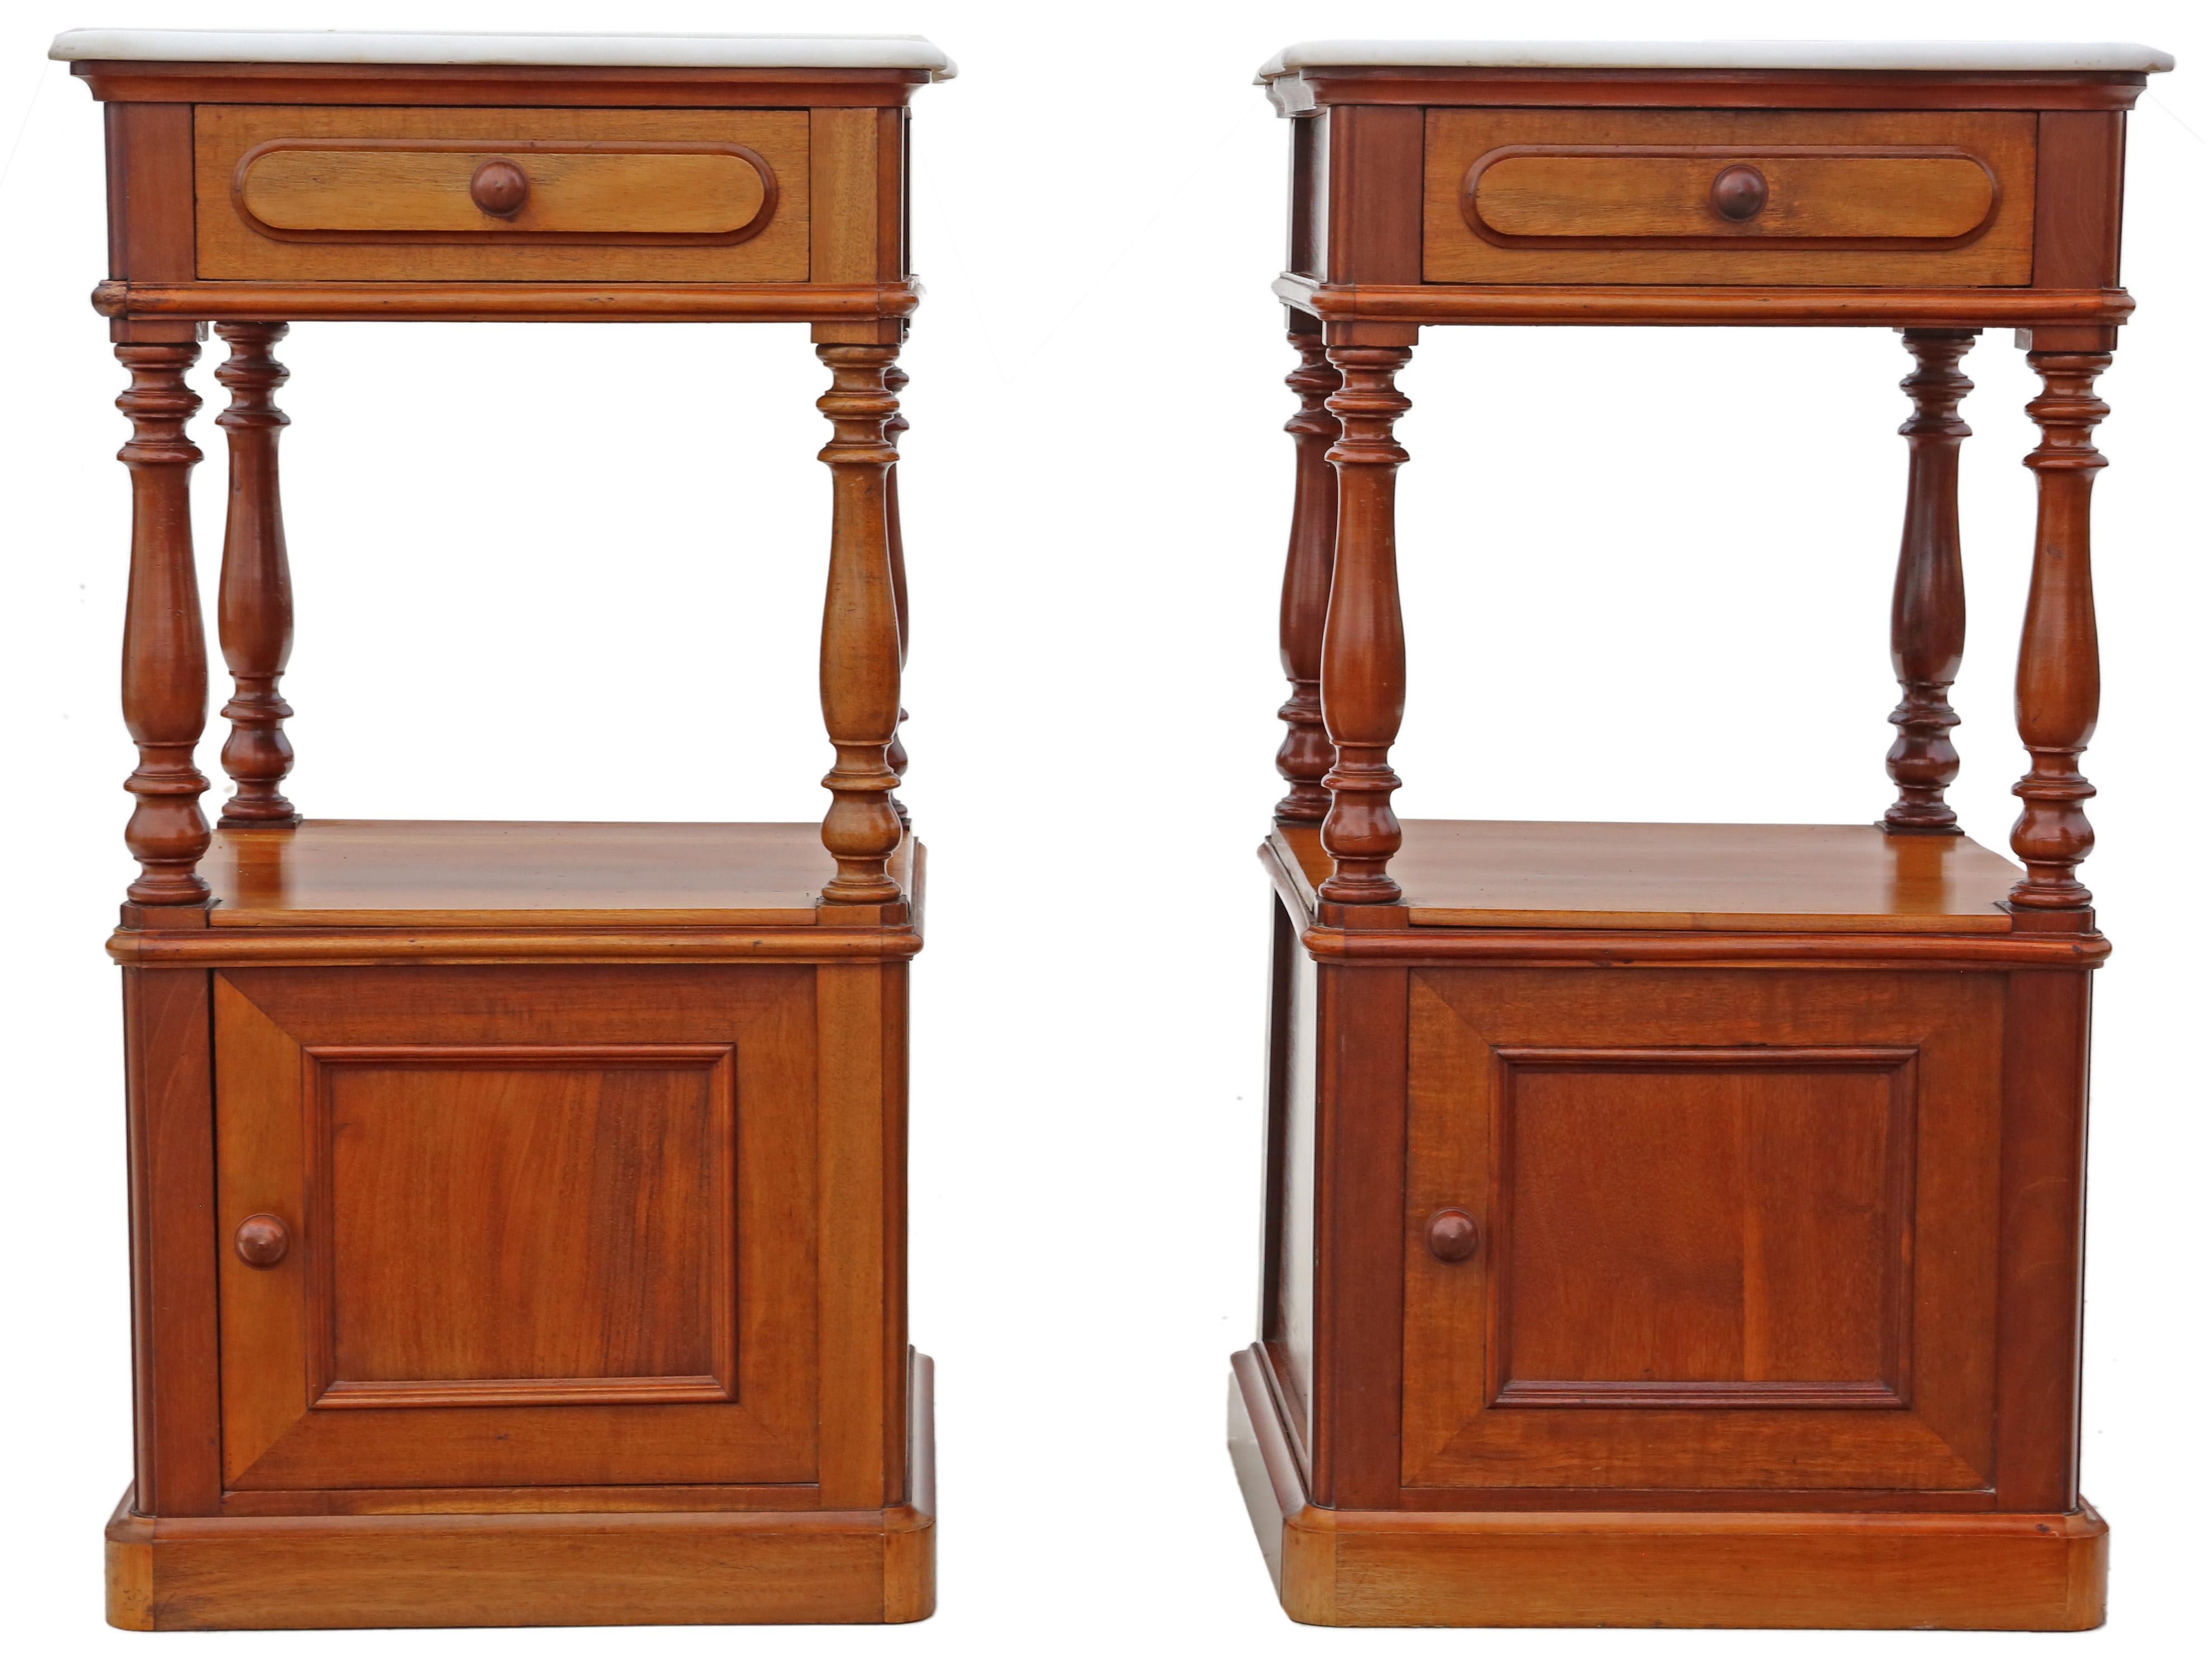 Antique fine quality pair of French walnut bedside tables cupboards marble tops C1920.

Very heavy and solid, with no loose joints and no woodworm. The drawers slide freely and the cupboard catches work.

Would look great in the right location!